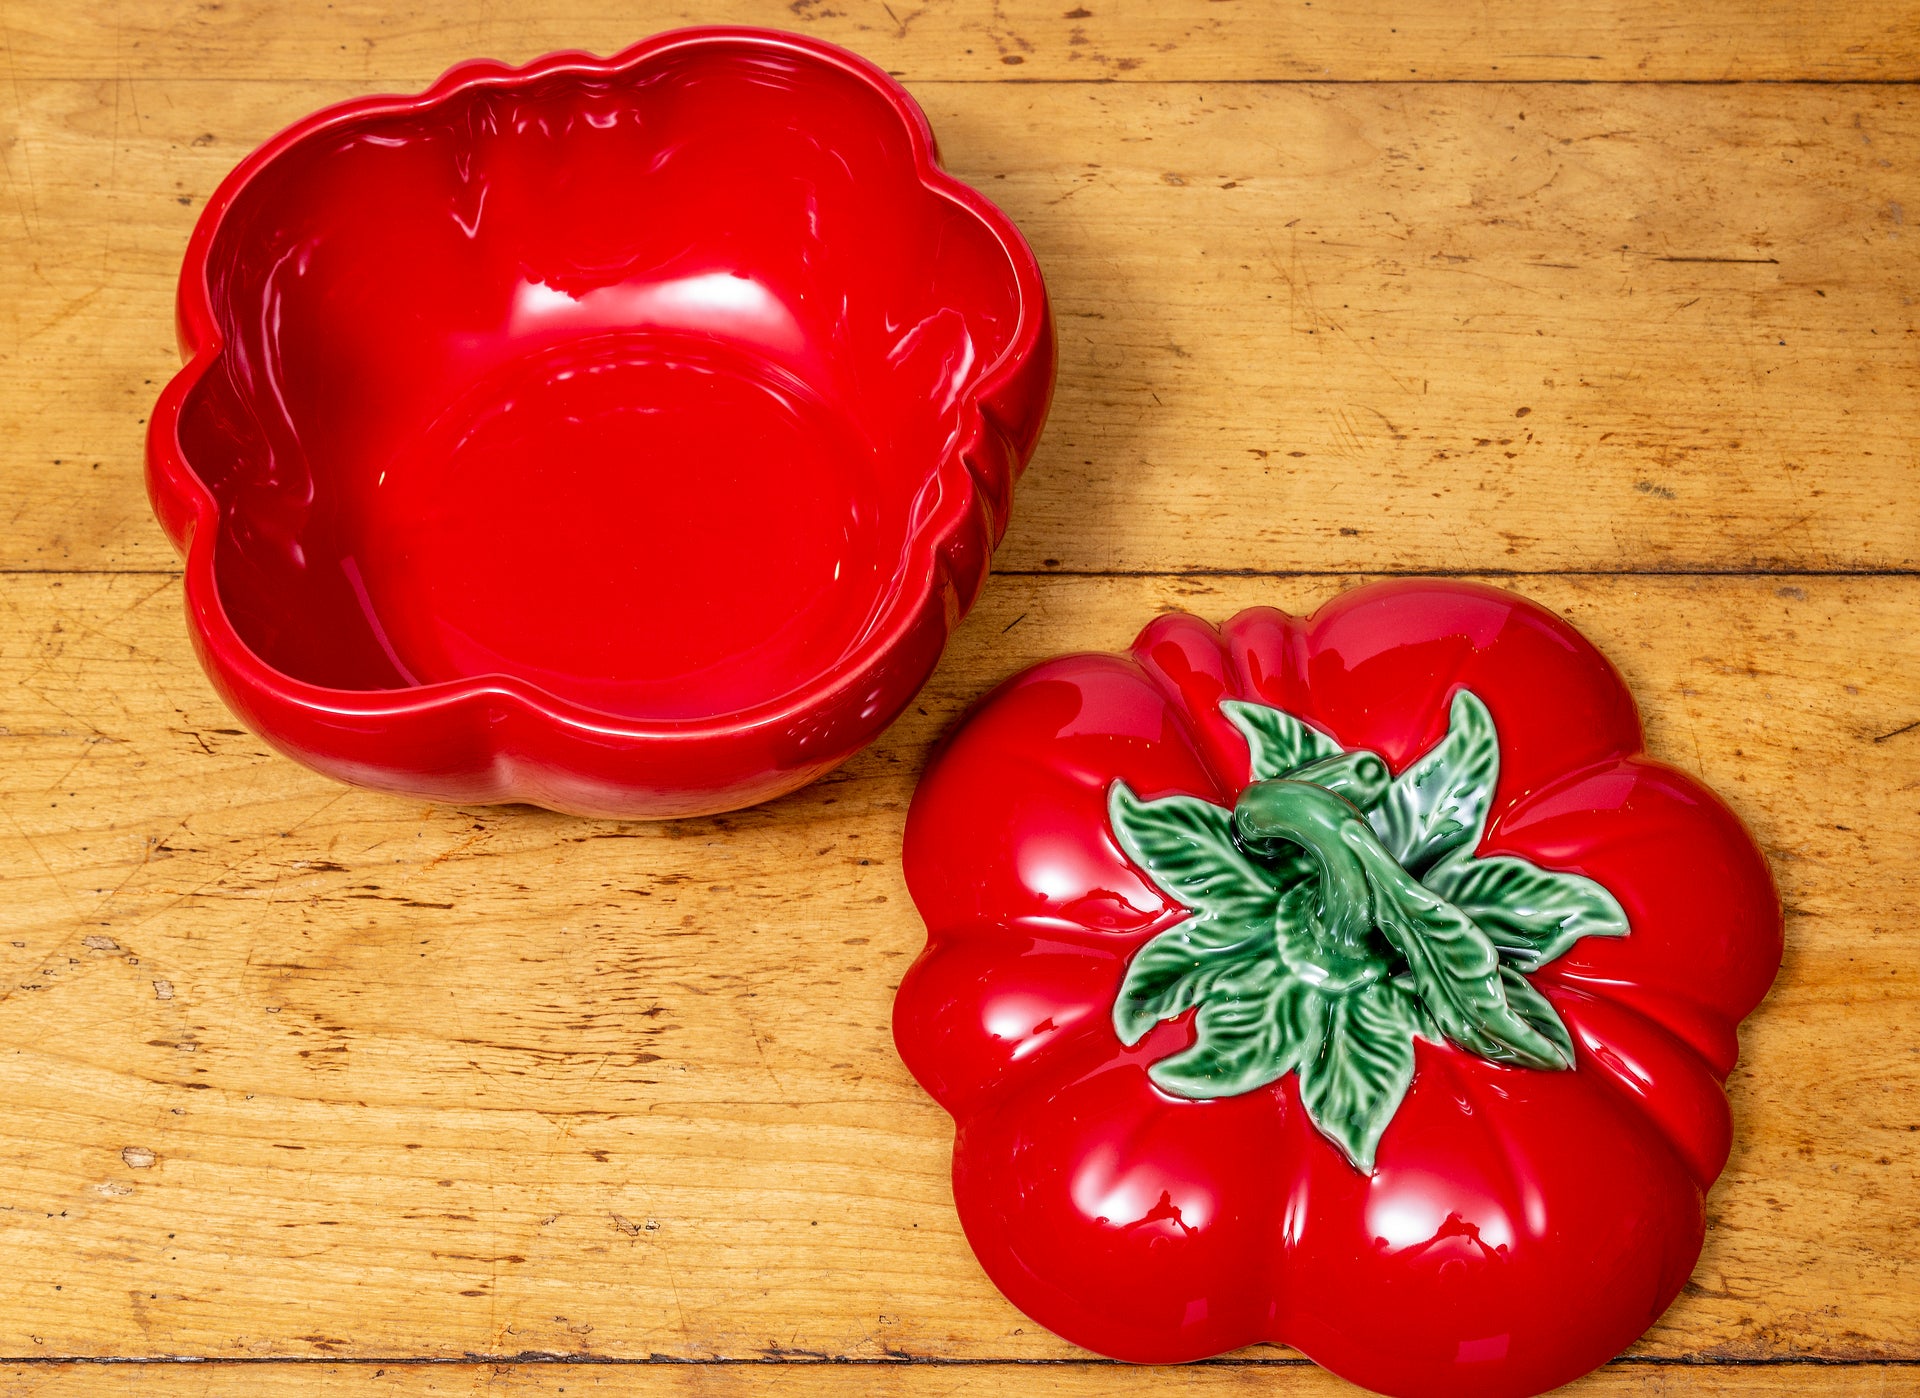 SOLD A large tomato shaped lidded tureen, by Bordallo Pinheiro Portugal